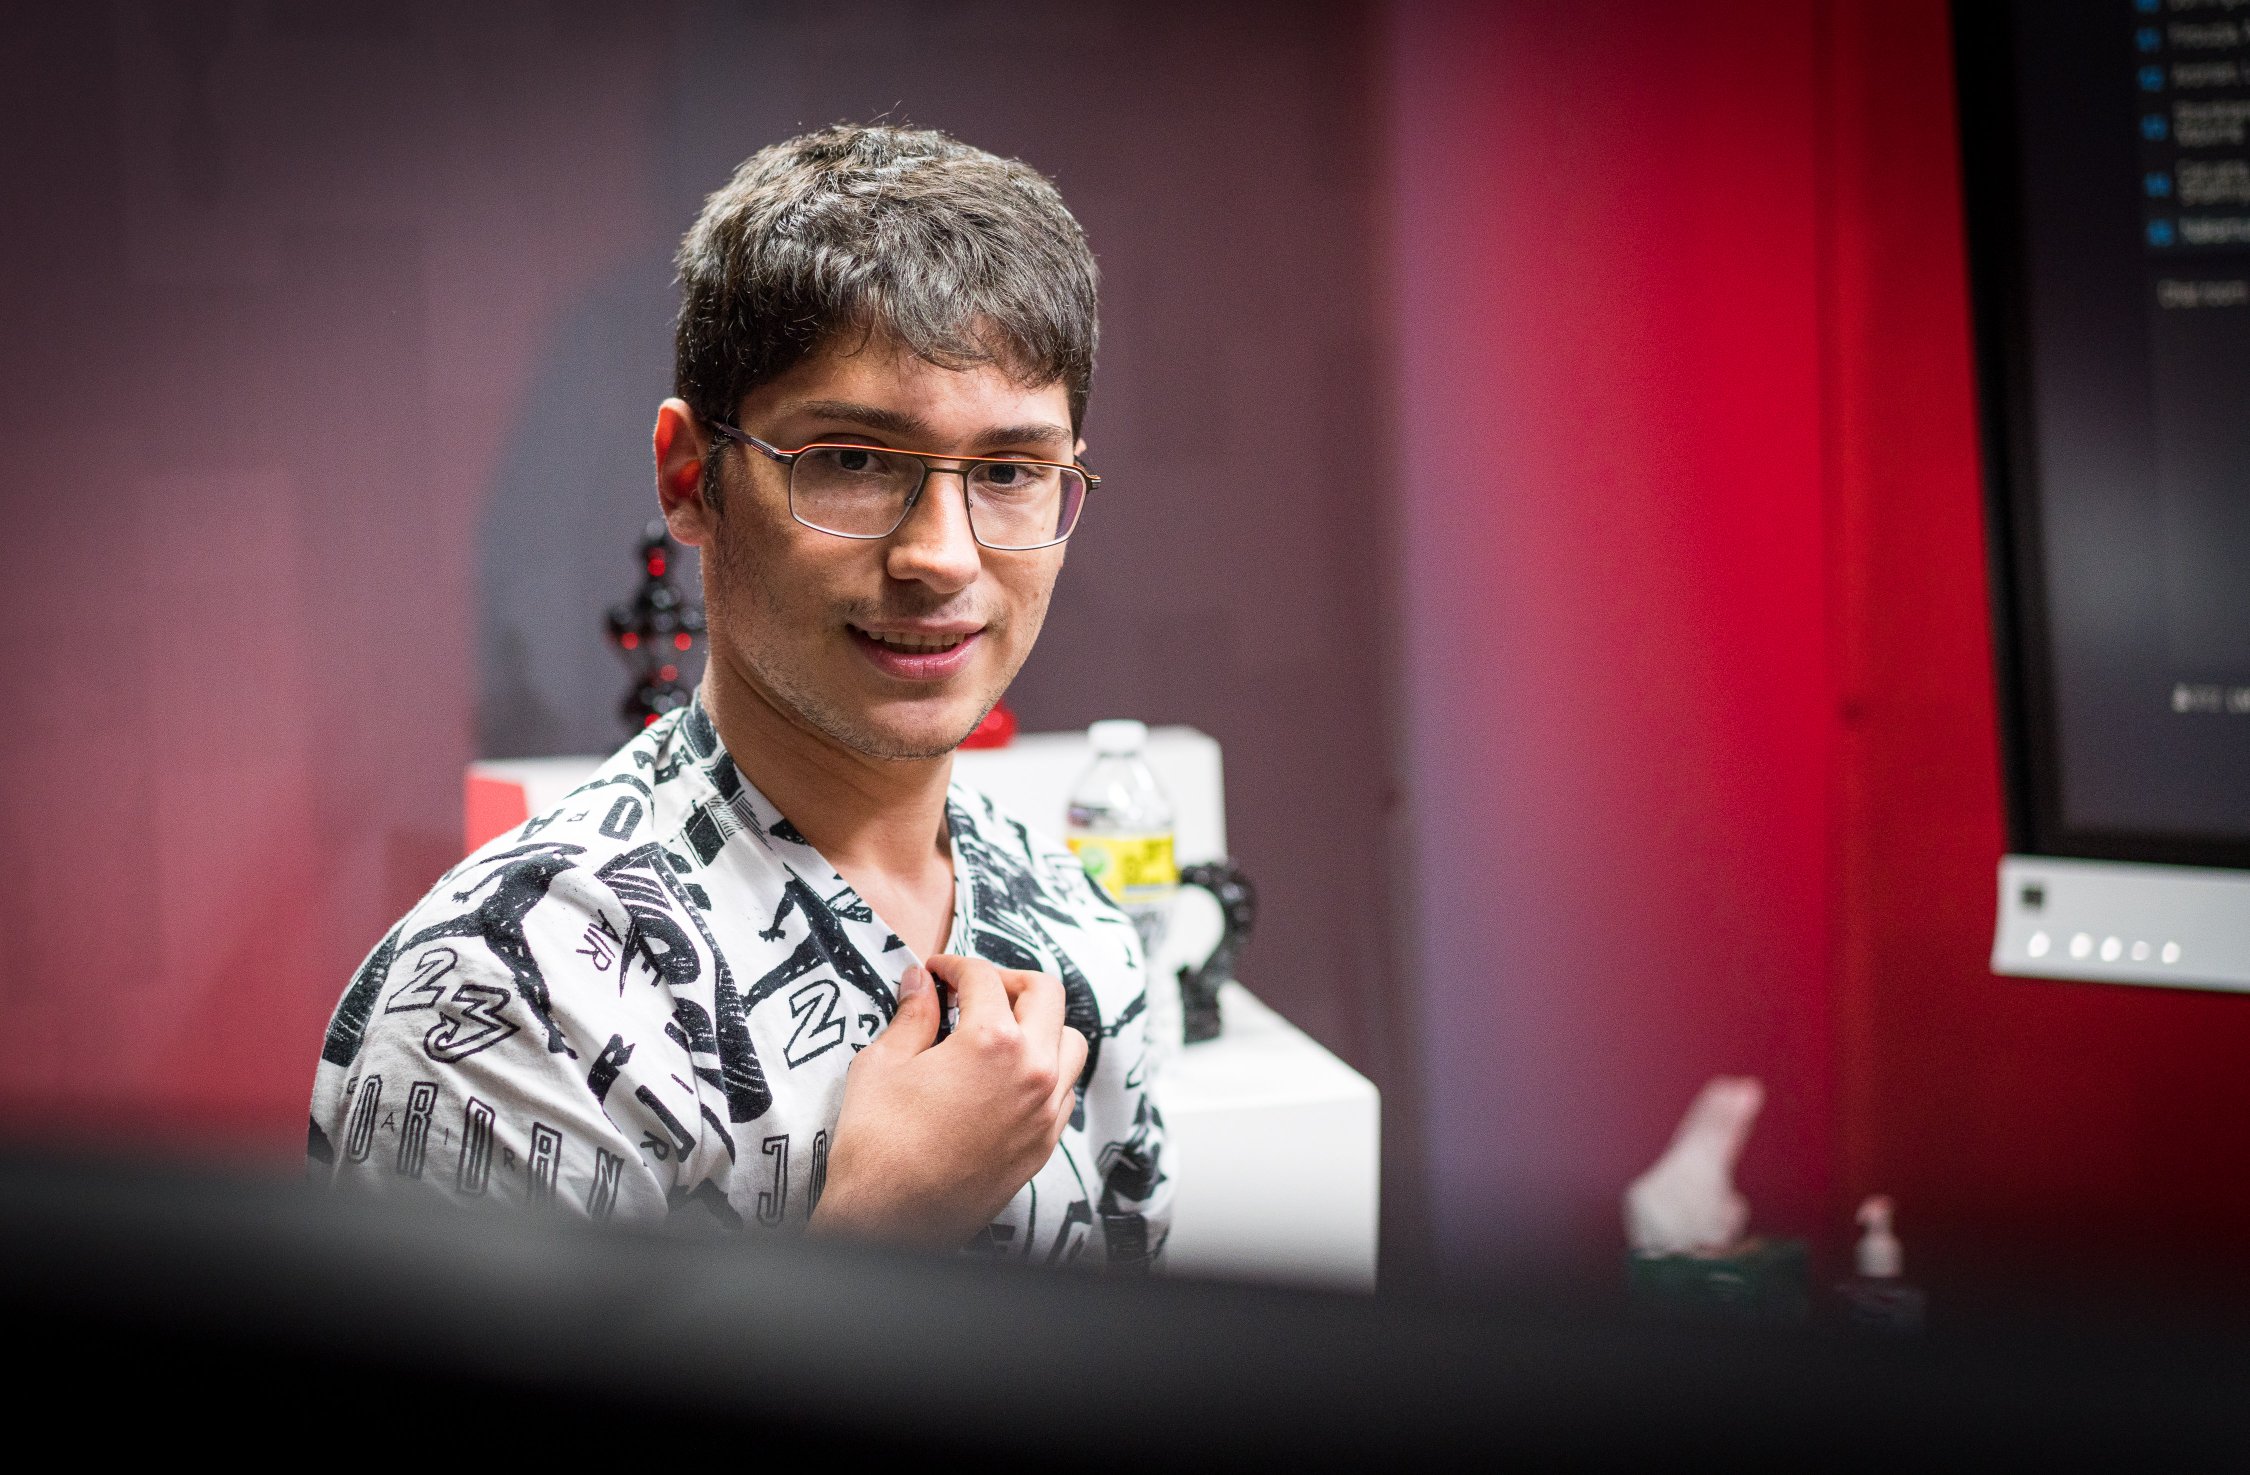 International Chess Federation on X: Throwback to the 2021  #FIDEGrandSwiss! The event was won by Alireza Firouzja @AlirezaFirouzja,  who scored 8/11 with a rating performance of 2855 and a 11.5 rating point